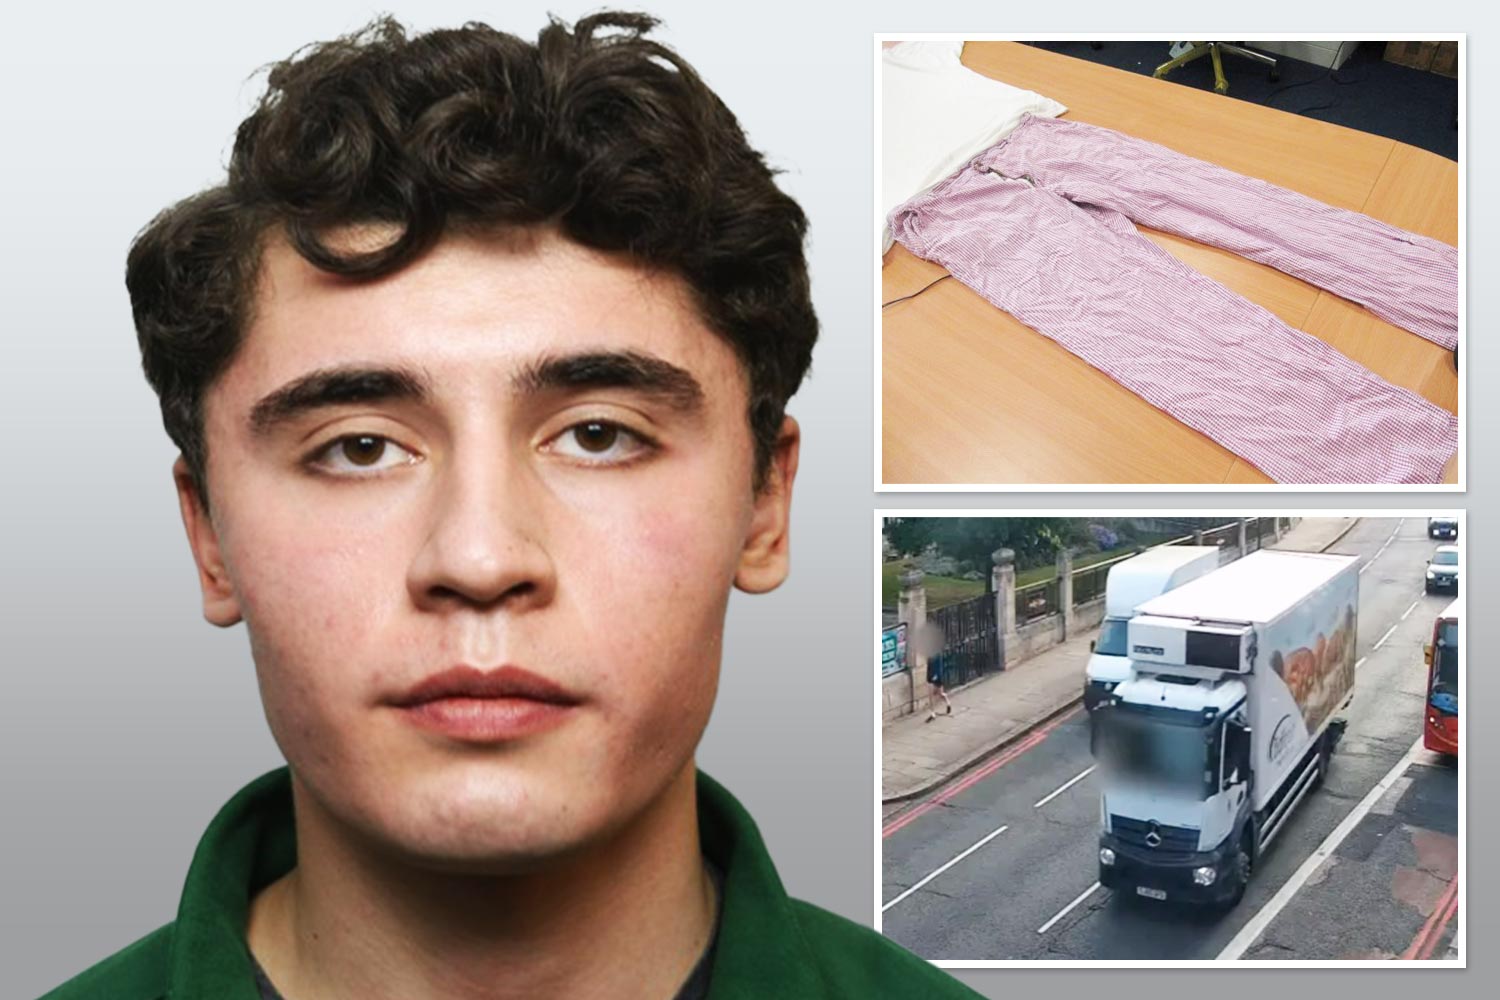 Daniel Khalife cops swoop on leafy London suburb after confirmed sighting of escaped ‘terrorist’